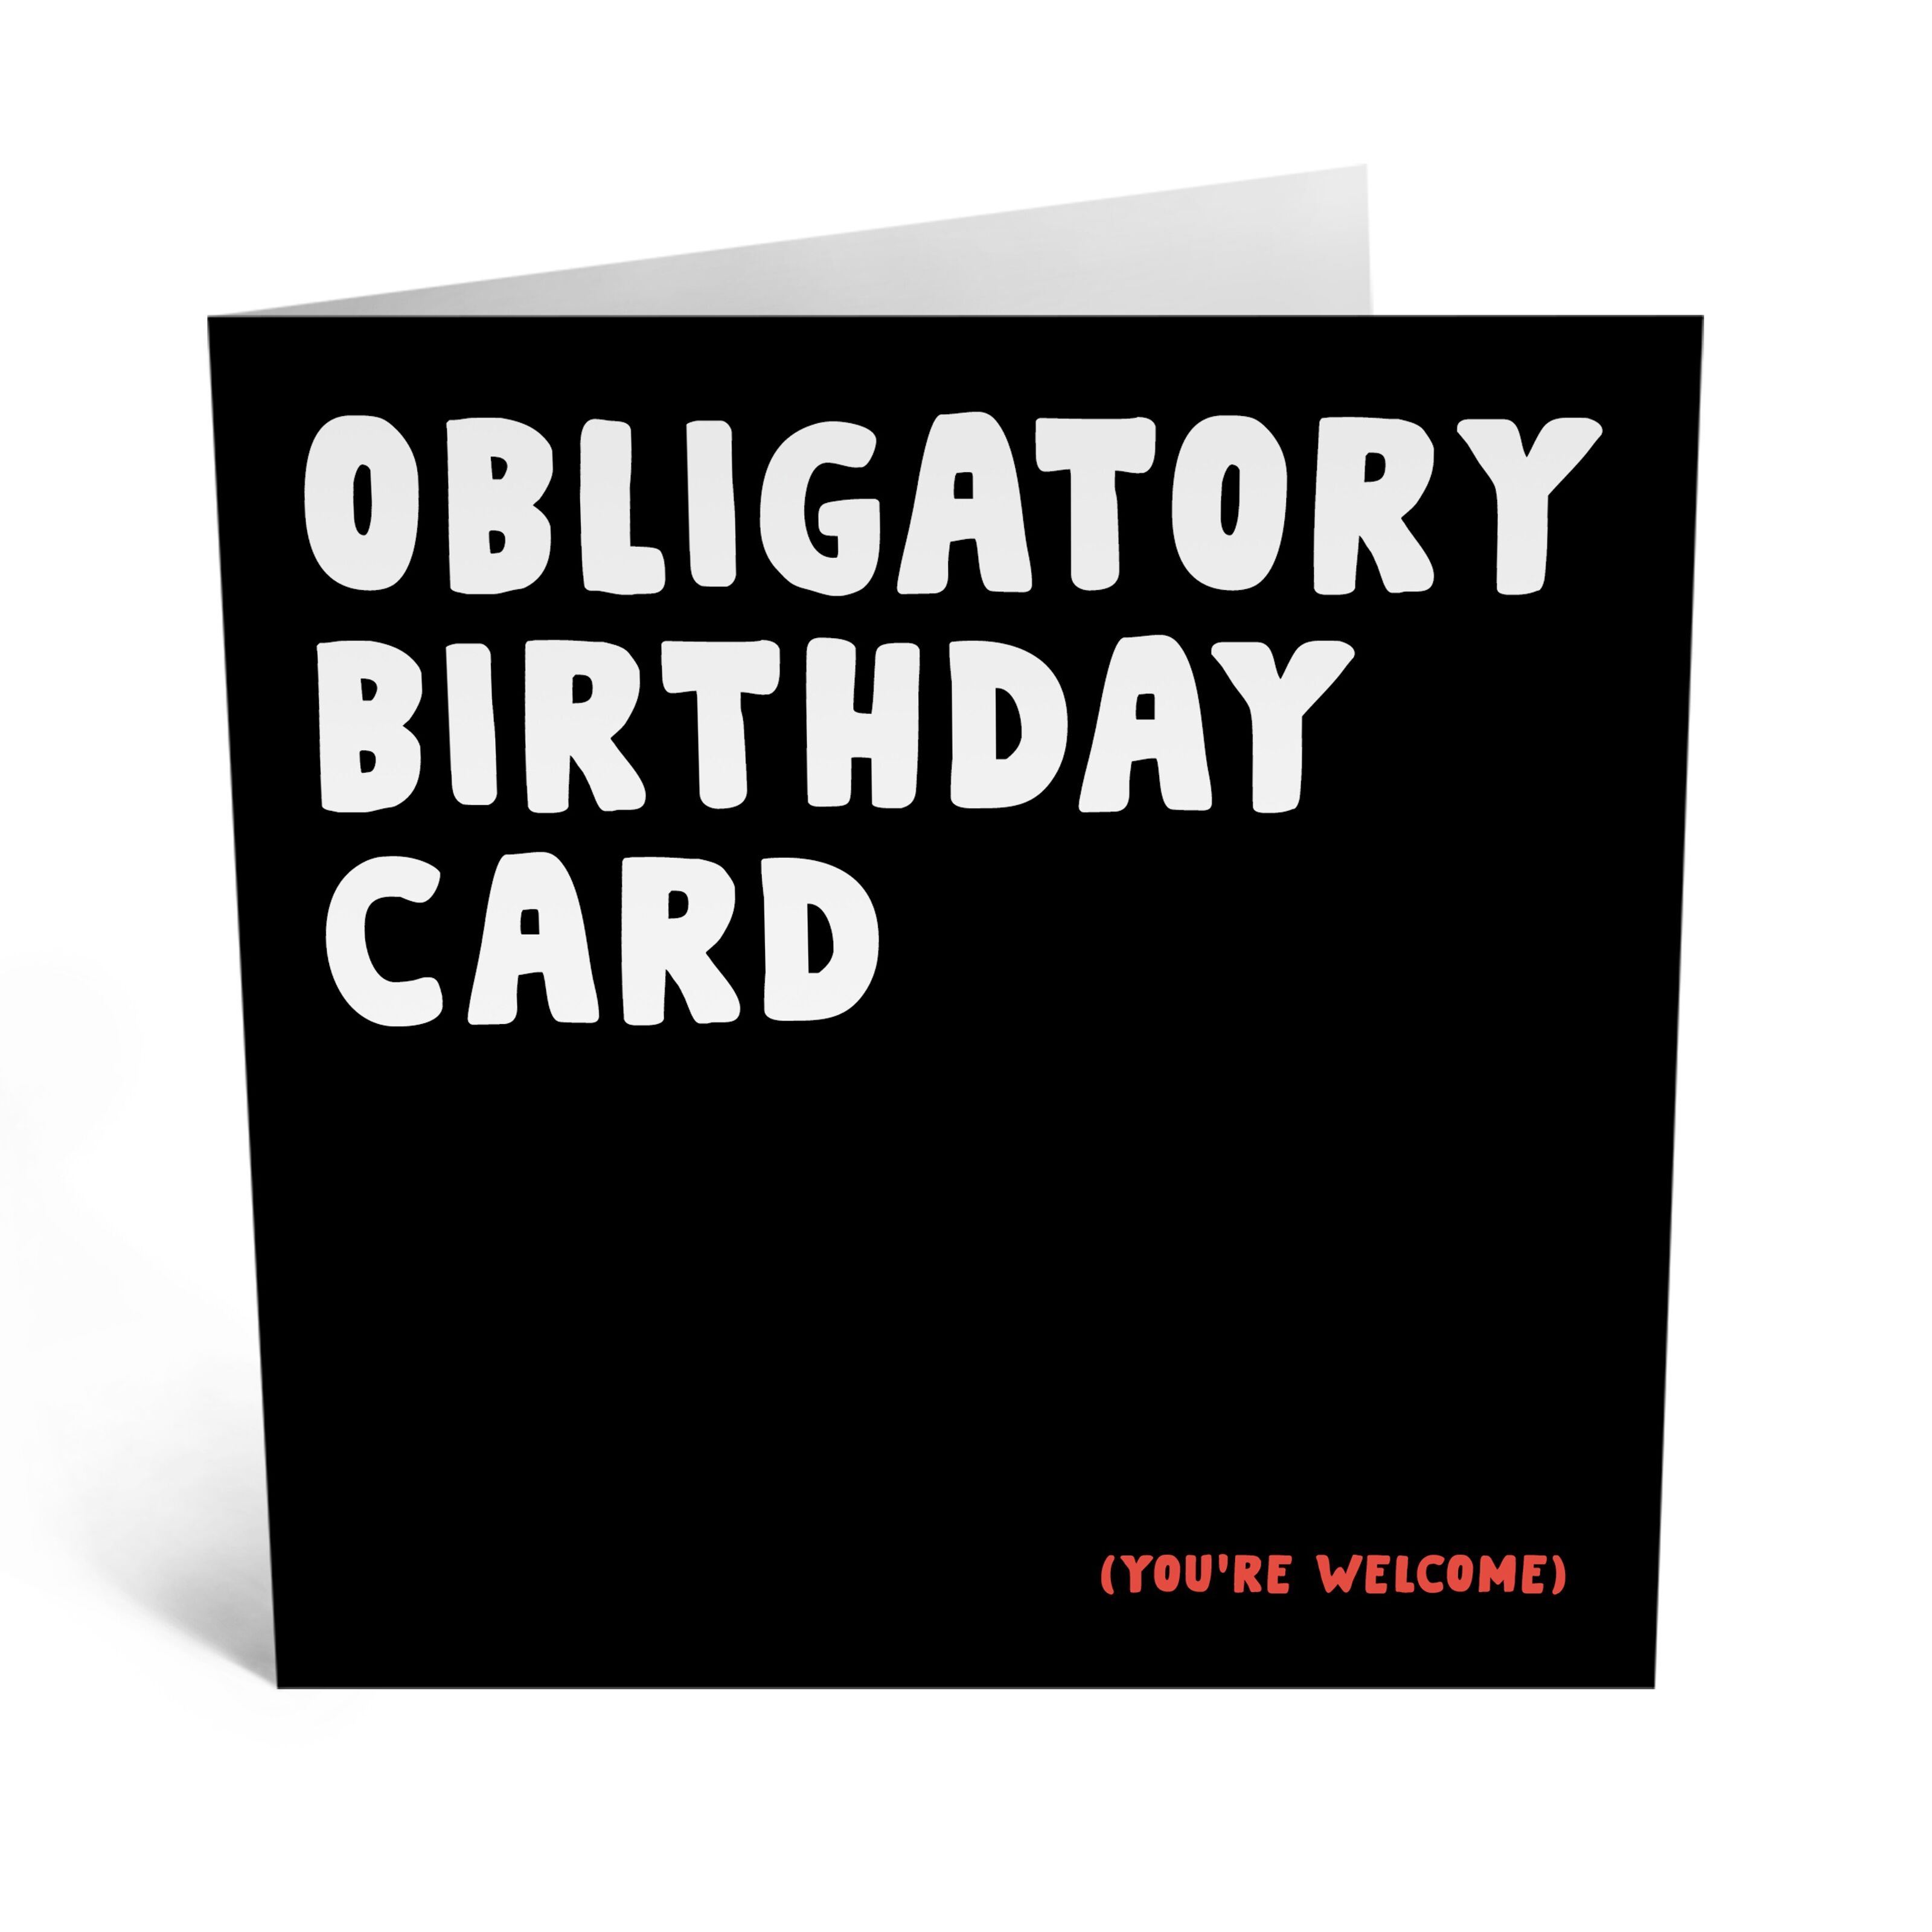 Buy wholesale Central 23 - OBLIGATORY BIRTHDAY CARD